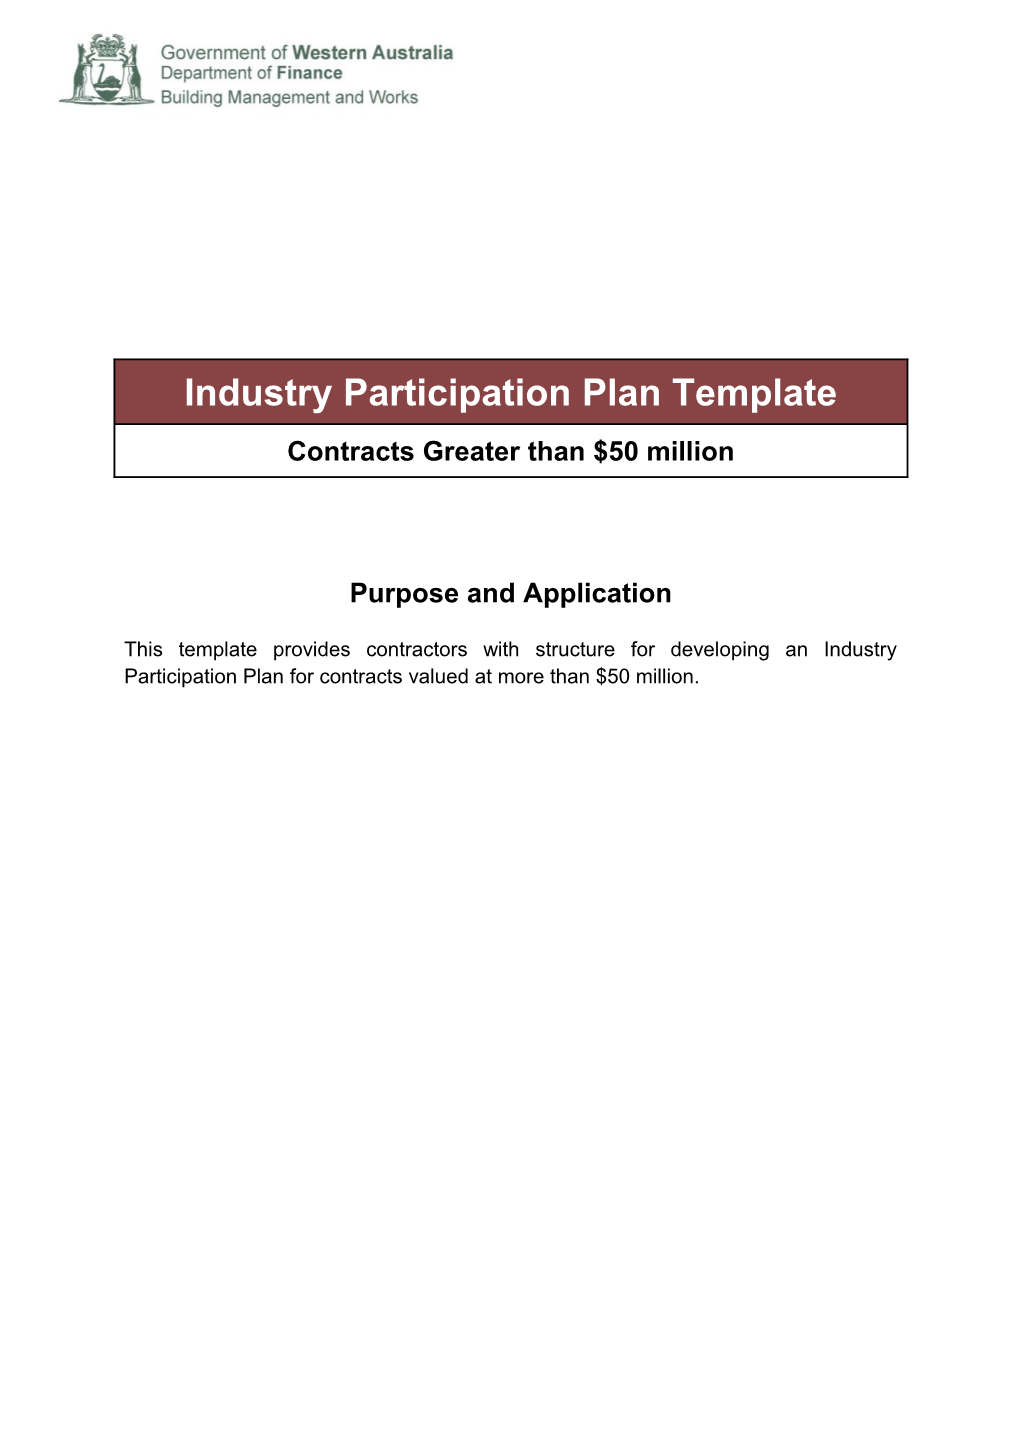 Industry Participation Plan Template for Contracts Over $50M